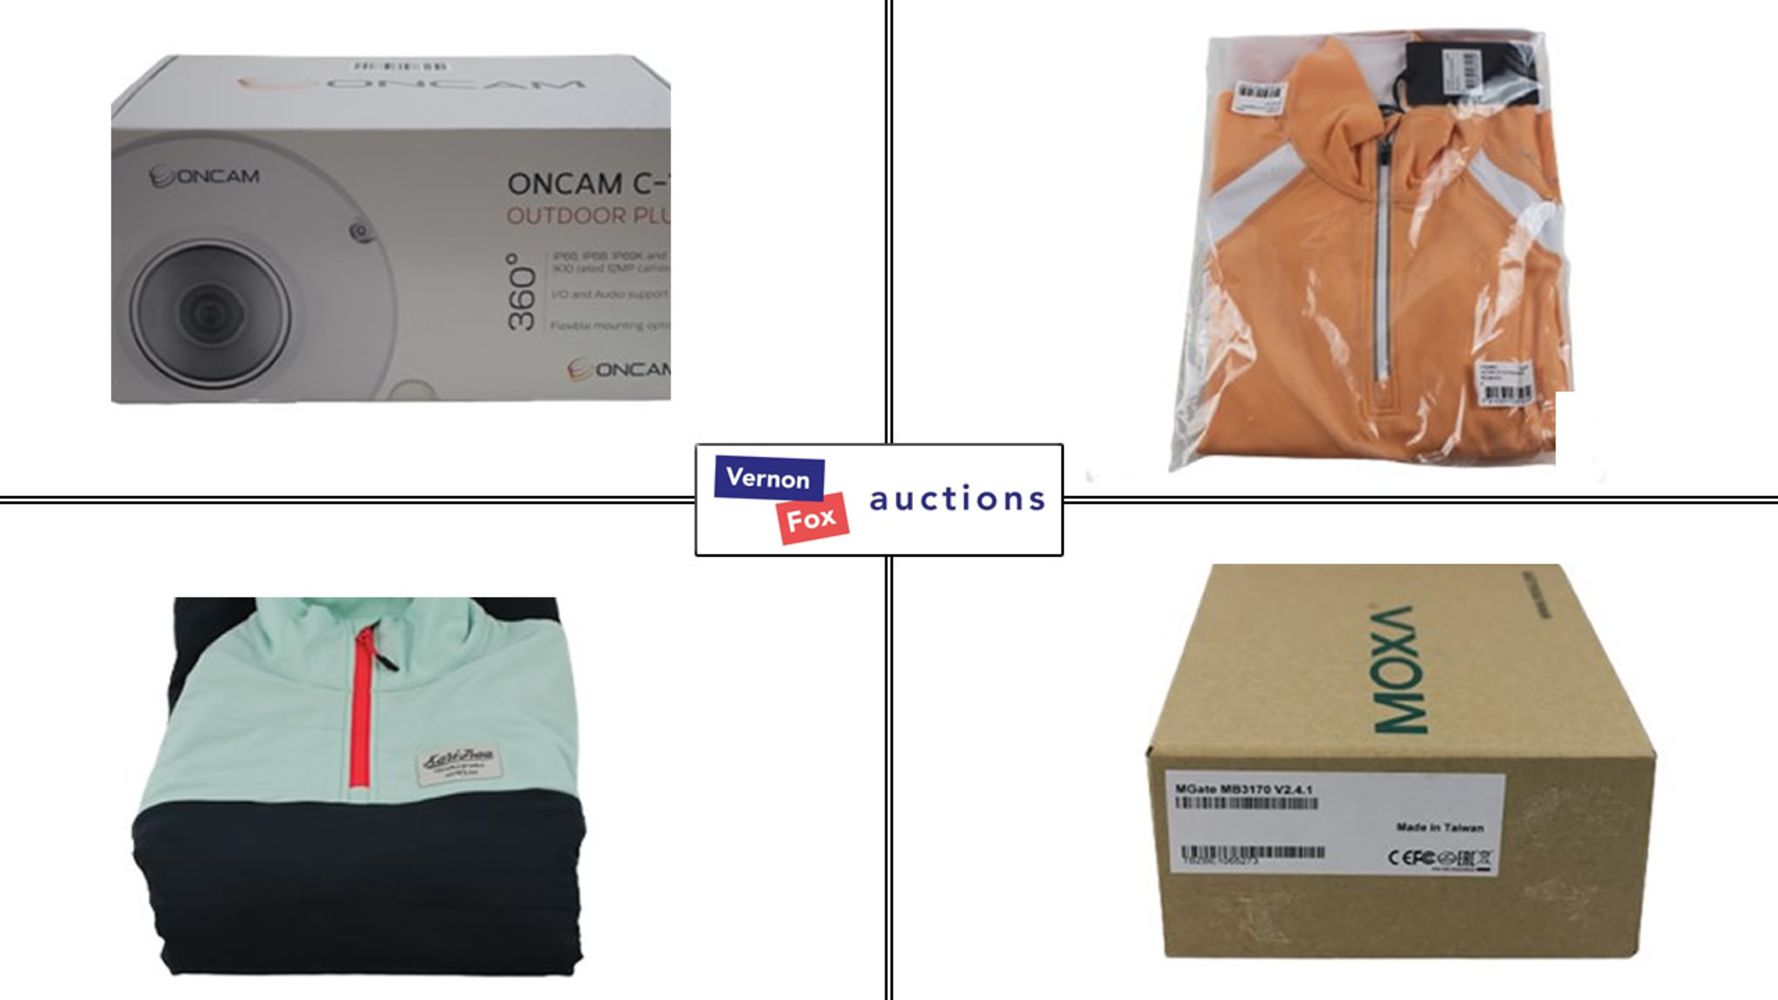 TIMED ONLINE AUCTION: A wide choice of IT Accessories, Gaming, Fitness Equipment and Sports Clothing Items. FREE UK DELIVERY!